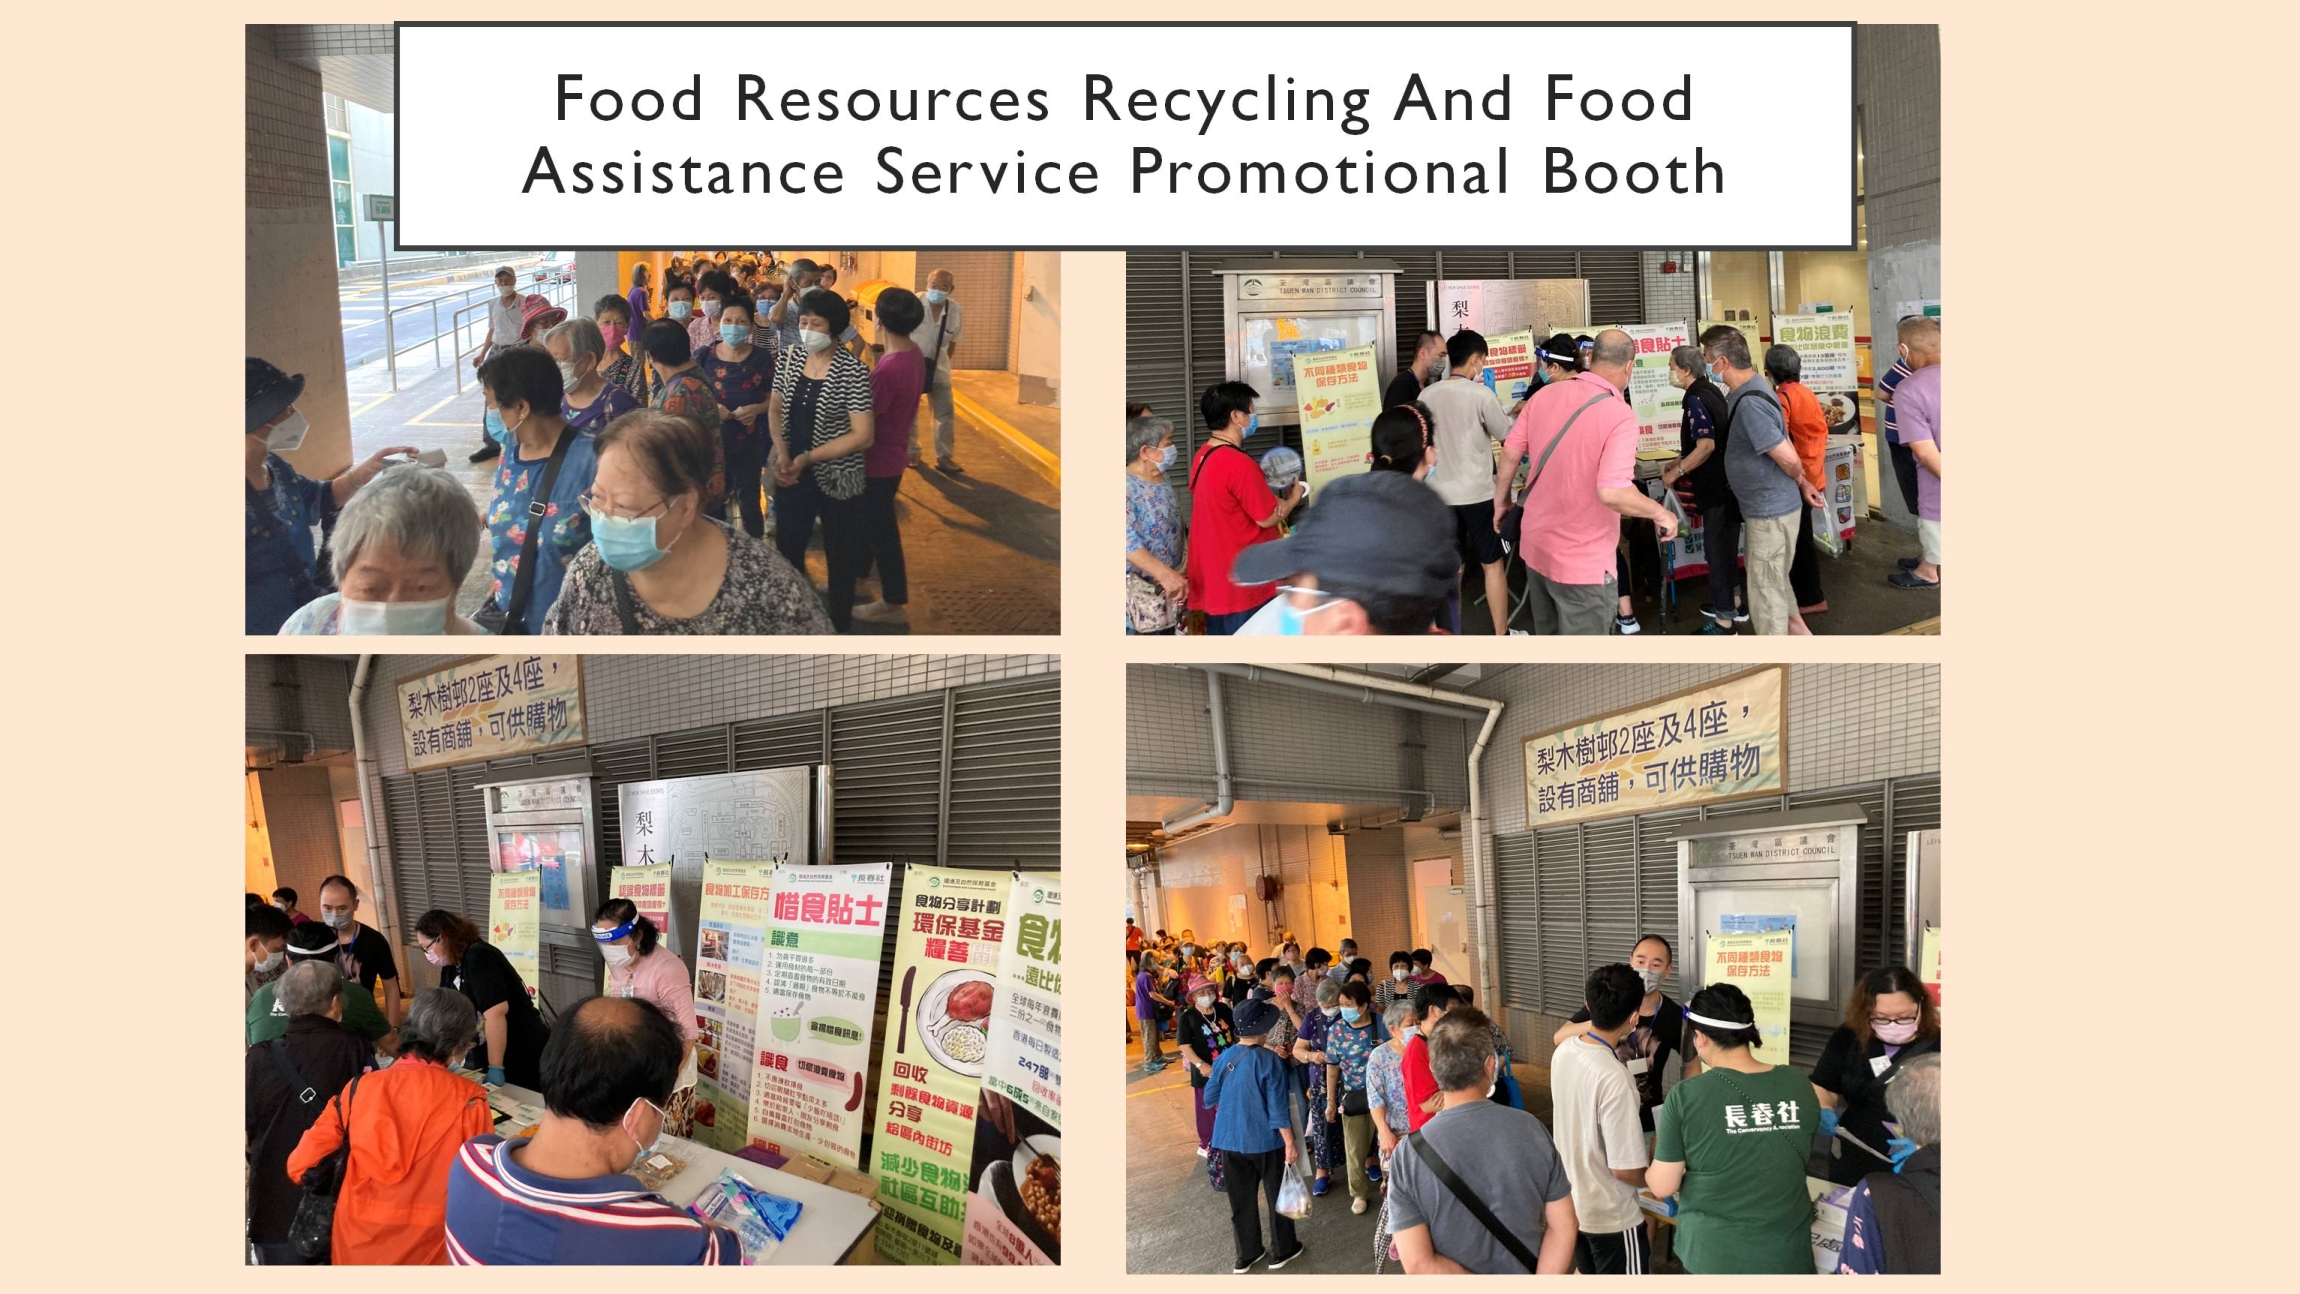 Self Photos / Files - Food Resources Recycling and Food Assistance Service promotional booth